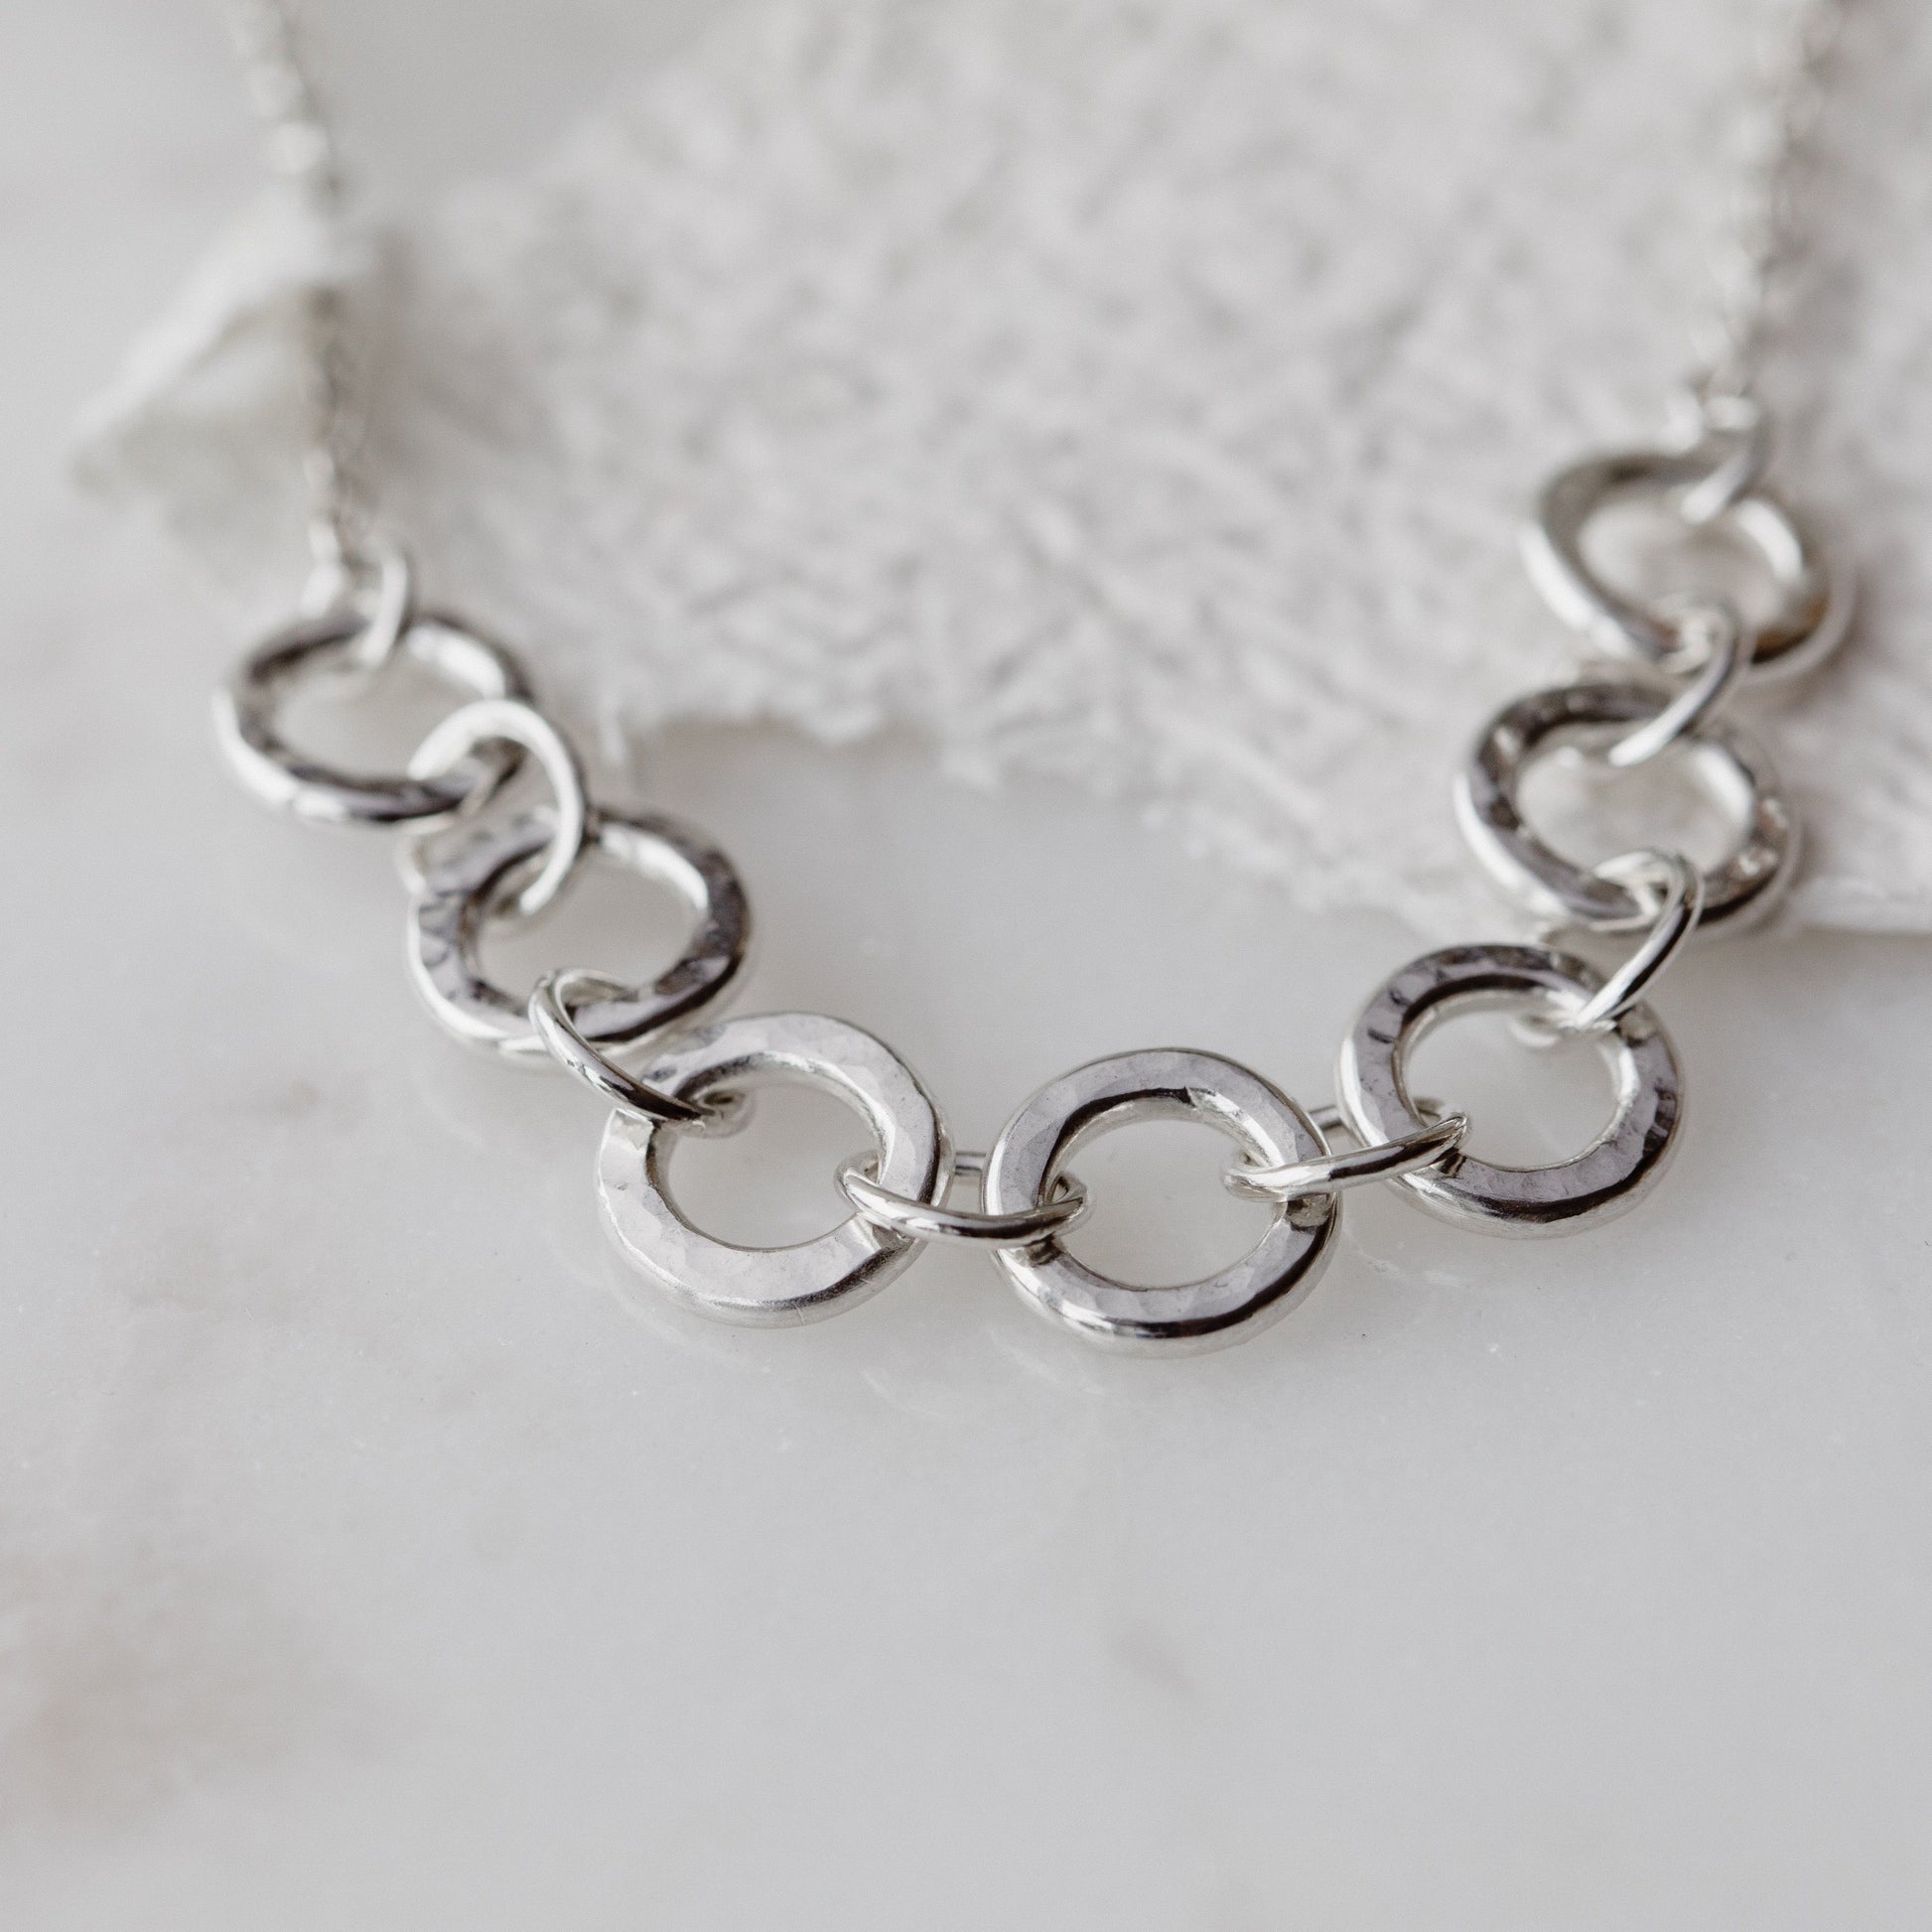 Handmade Silver Affinity Necklace with Eco Silver Anna Calvert Jewellery 